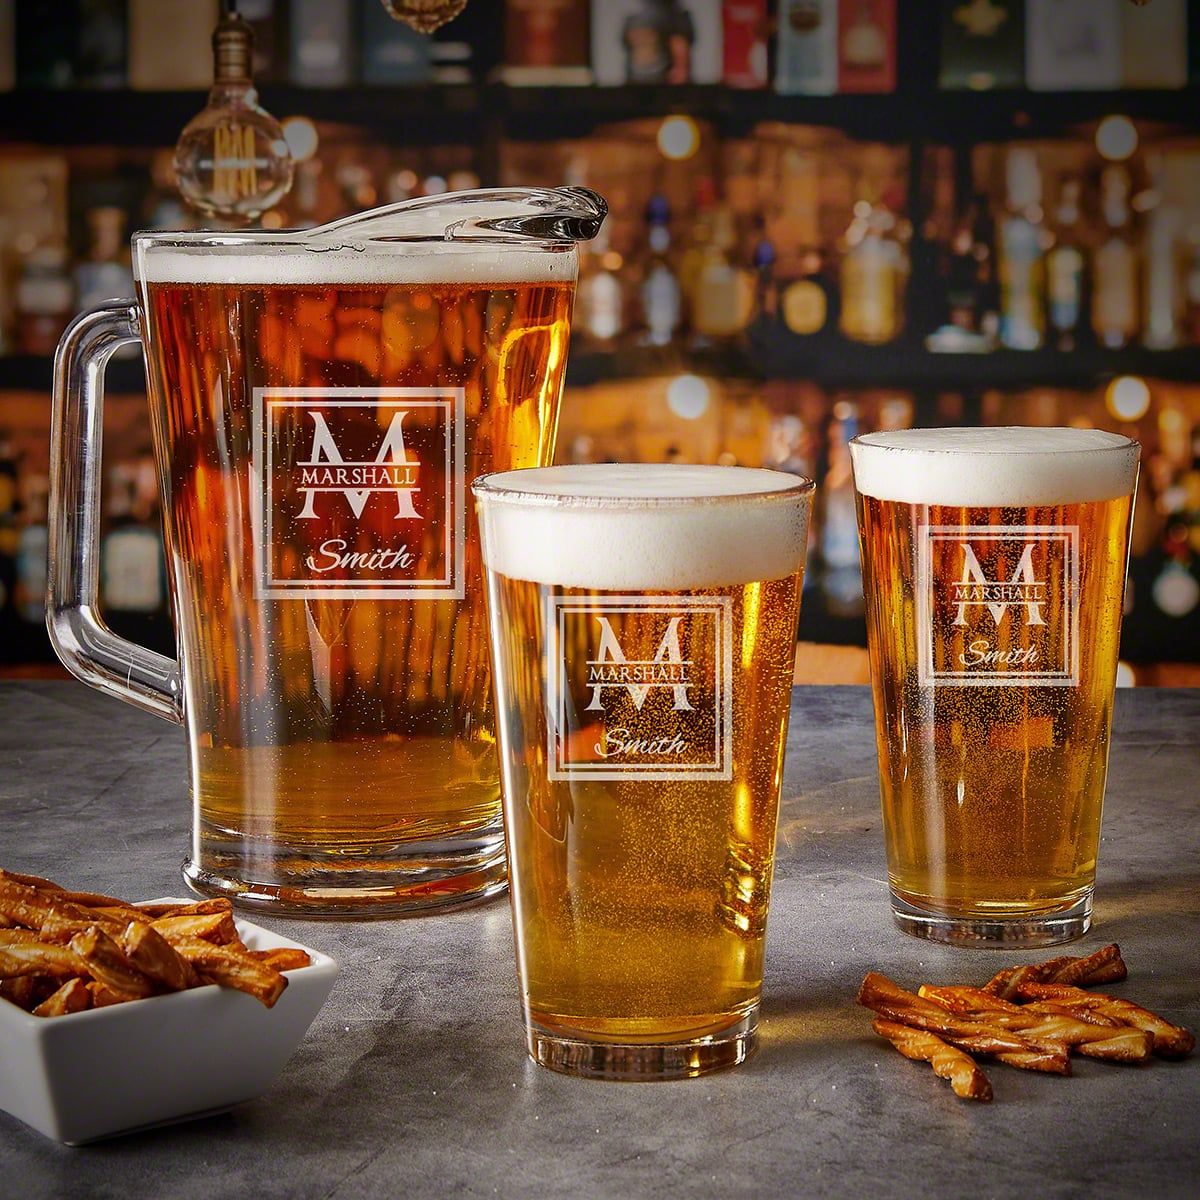 https://images.homewetbar.com/media/catalog/product/o/a/oakhill-glass-pitcher-with-pint-glasses-p_7586_1.jpg?store=default&image-type=image